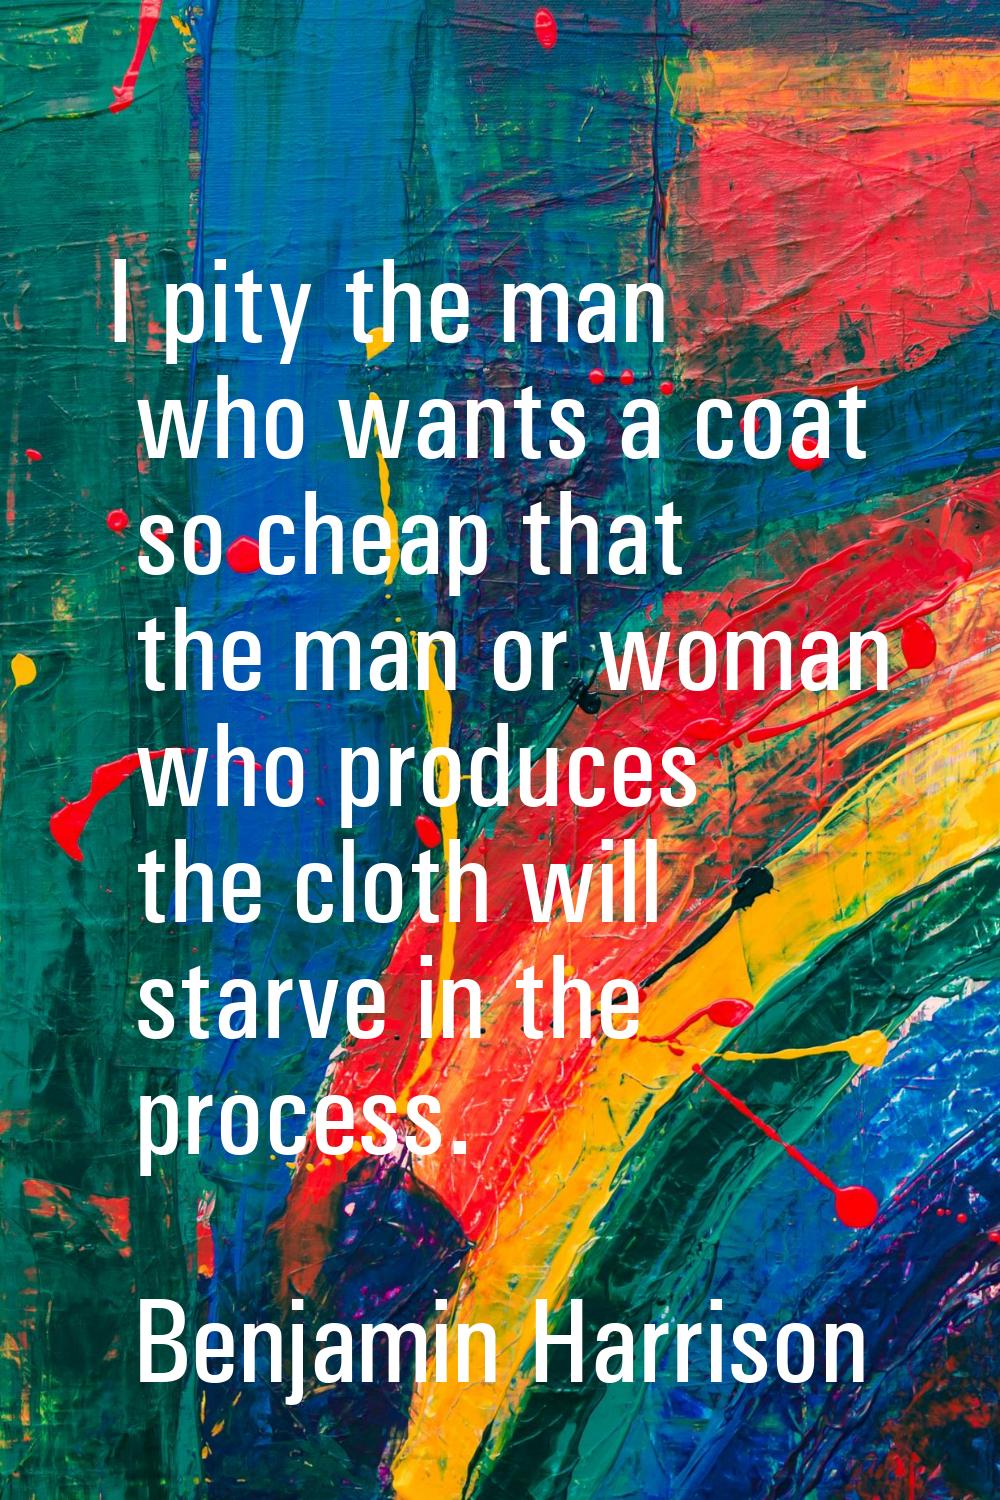 I pity the man who wants a coat so cheap that the man or woman who produces the cloth will starve i